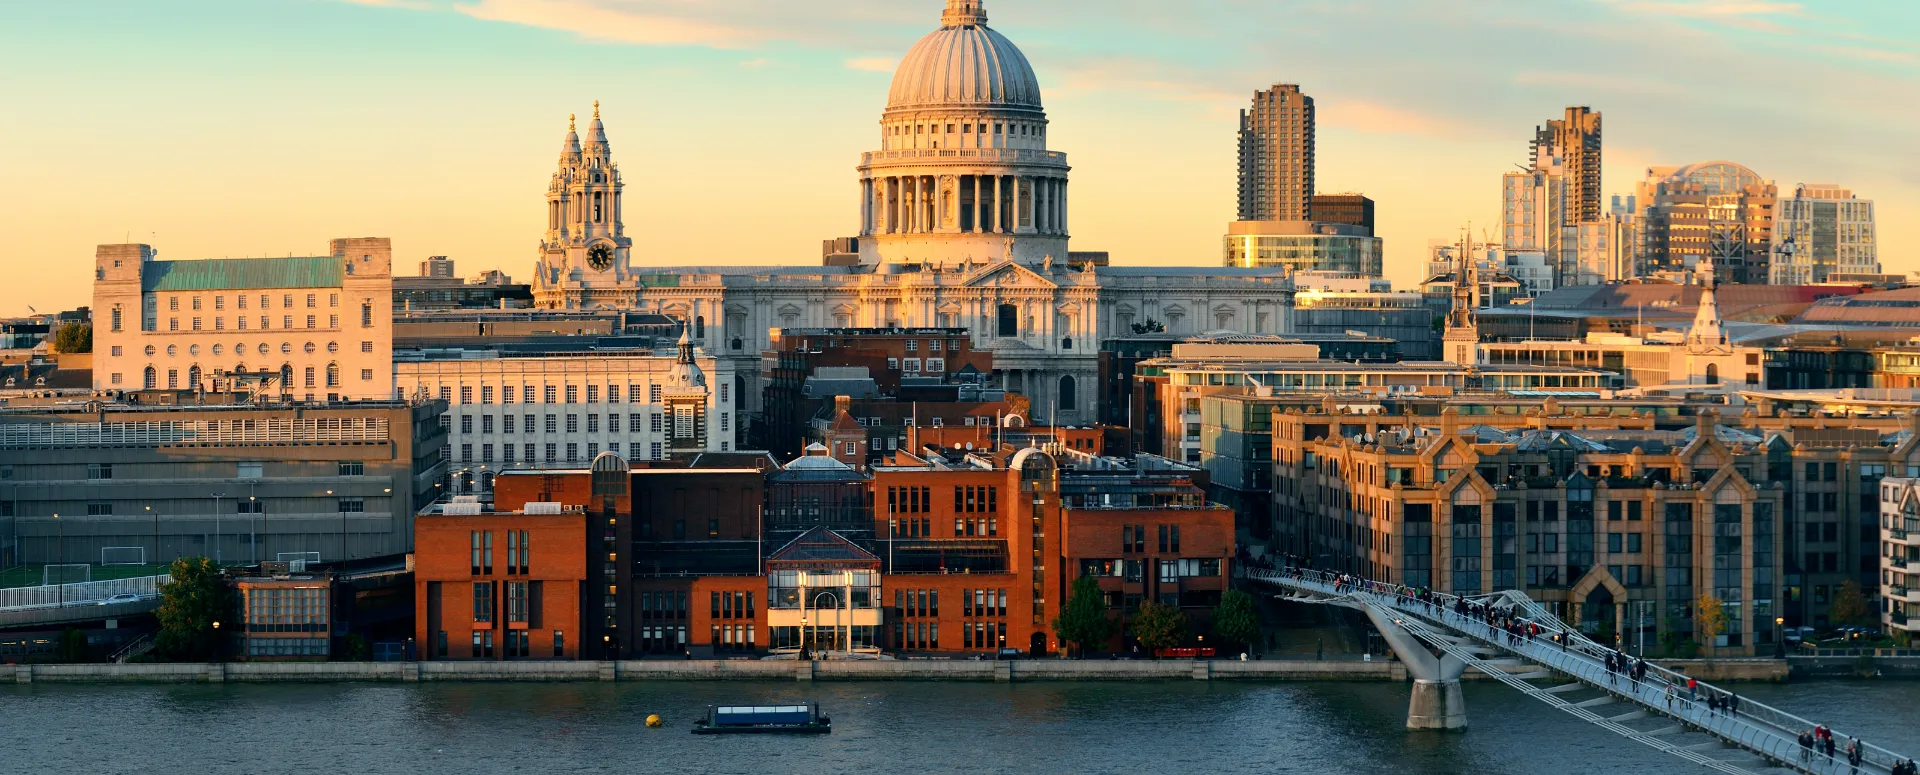 St. Paul's Cathedral in London, U.K.